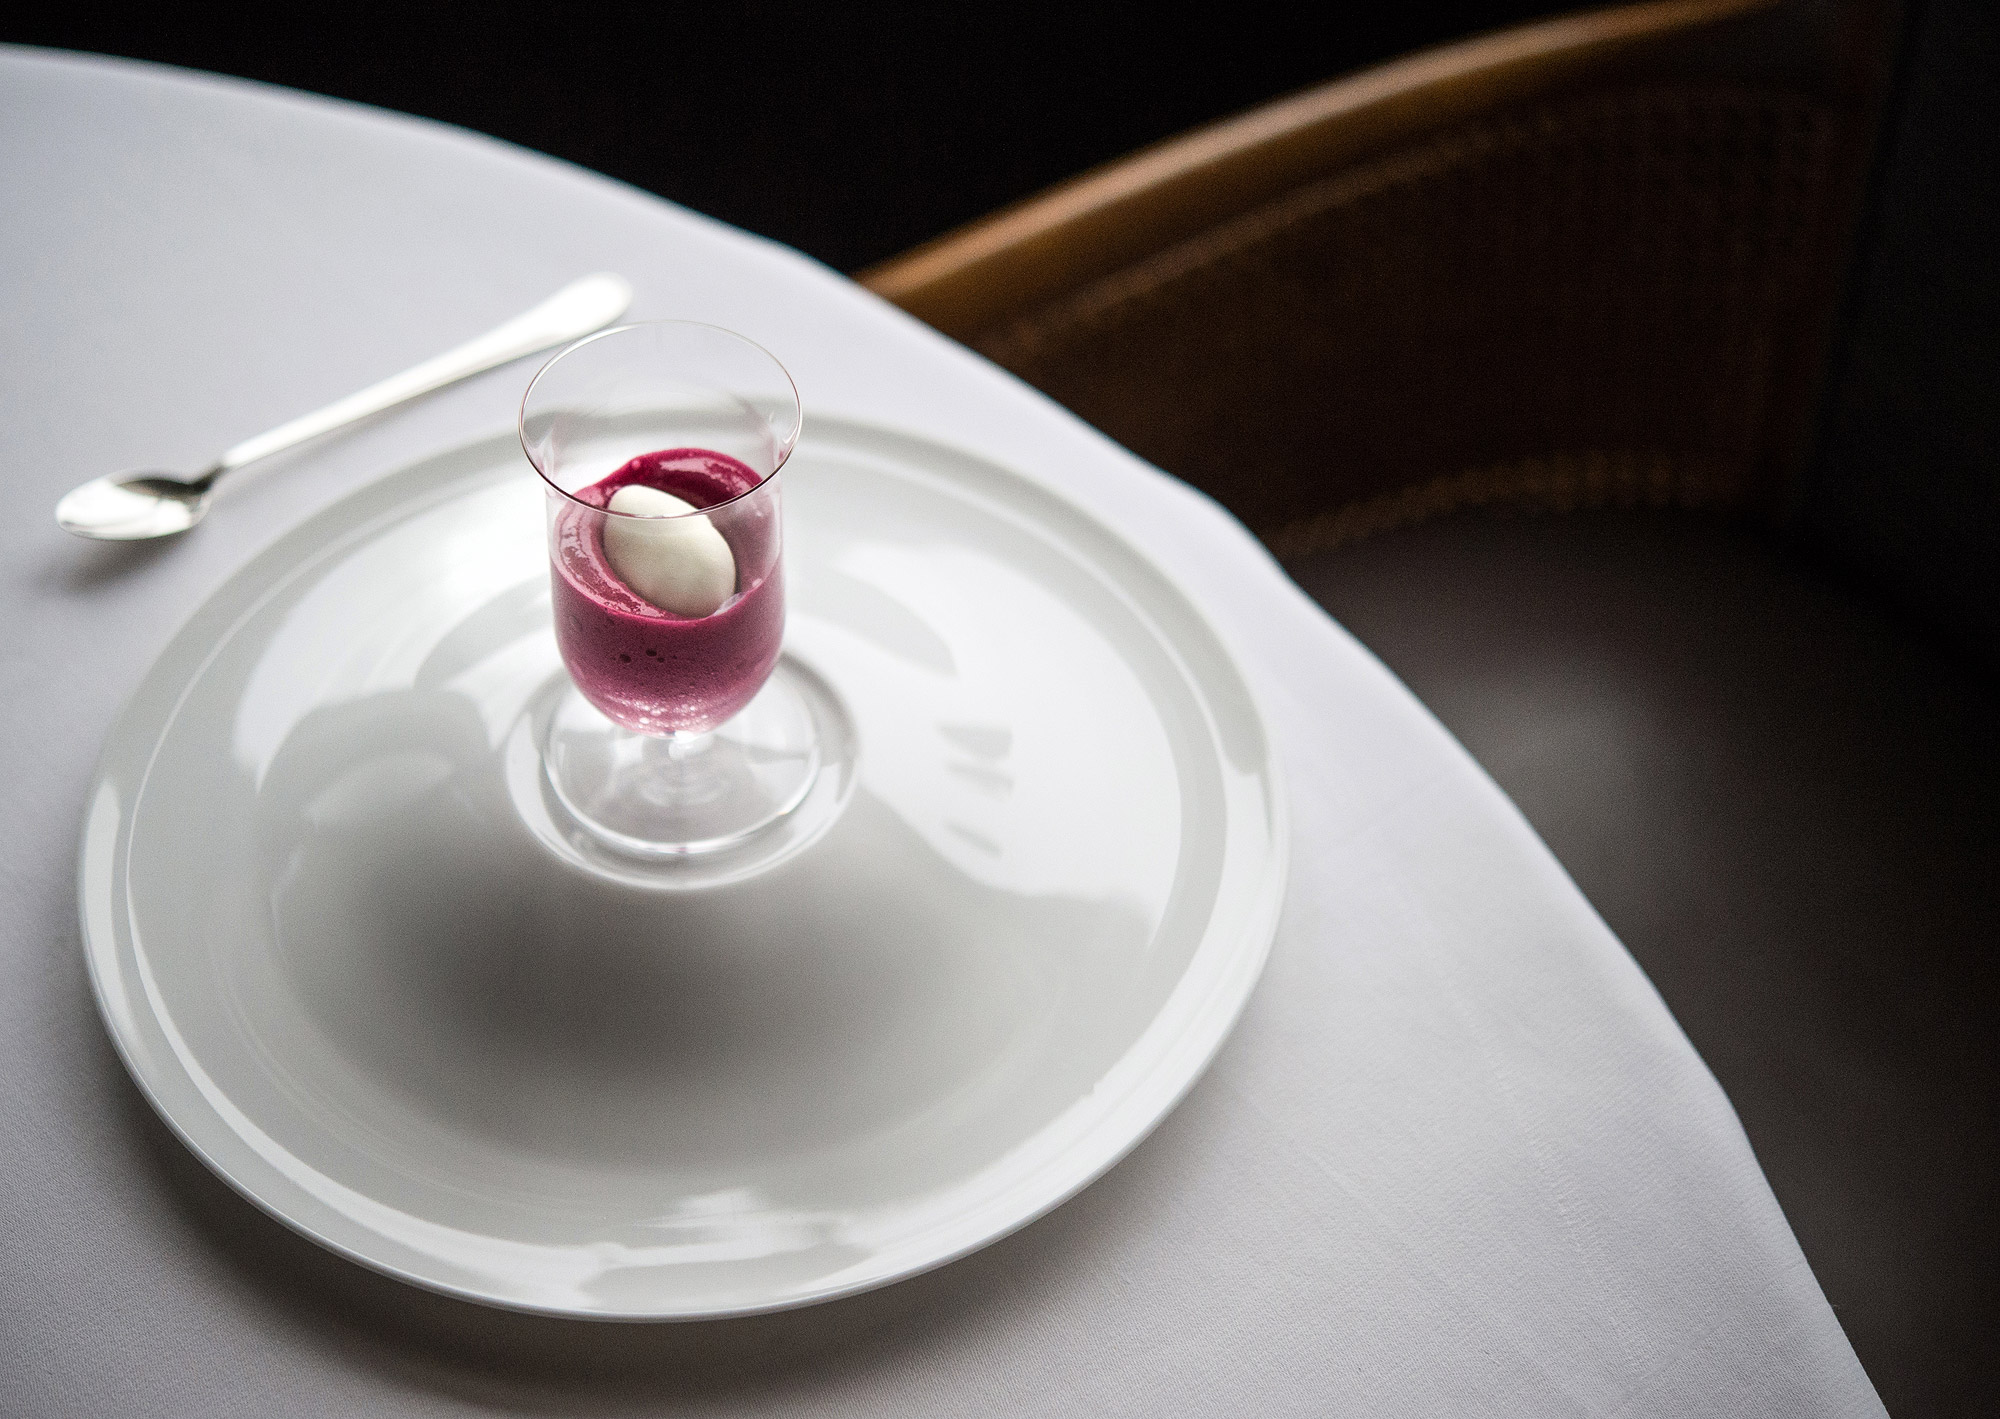 A purple-colored foam sits underneath a white quenelle in a clear glass on a white plate at Per Se